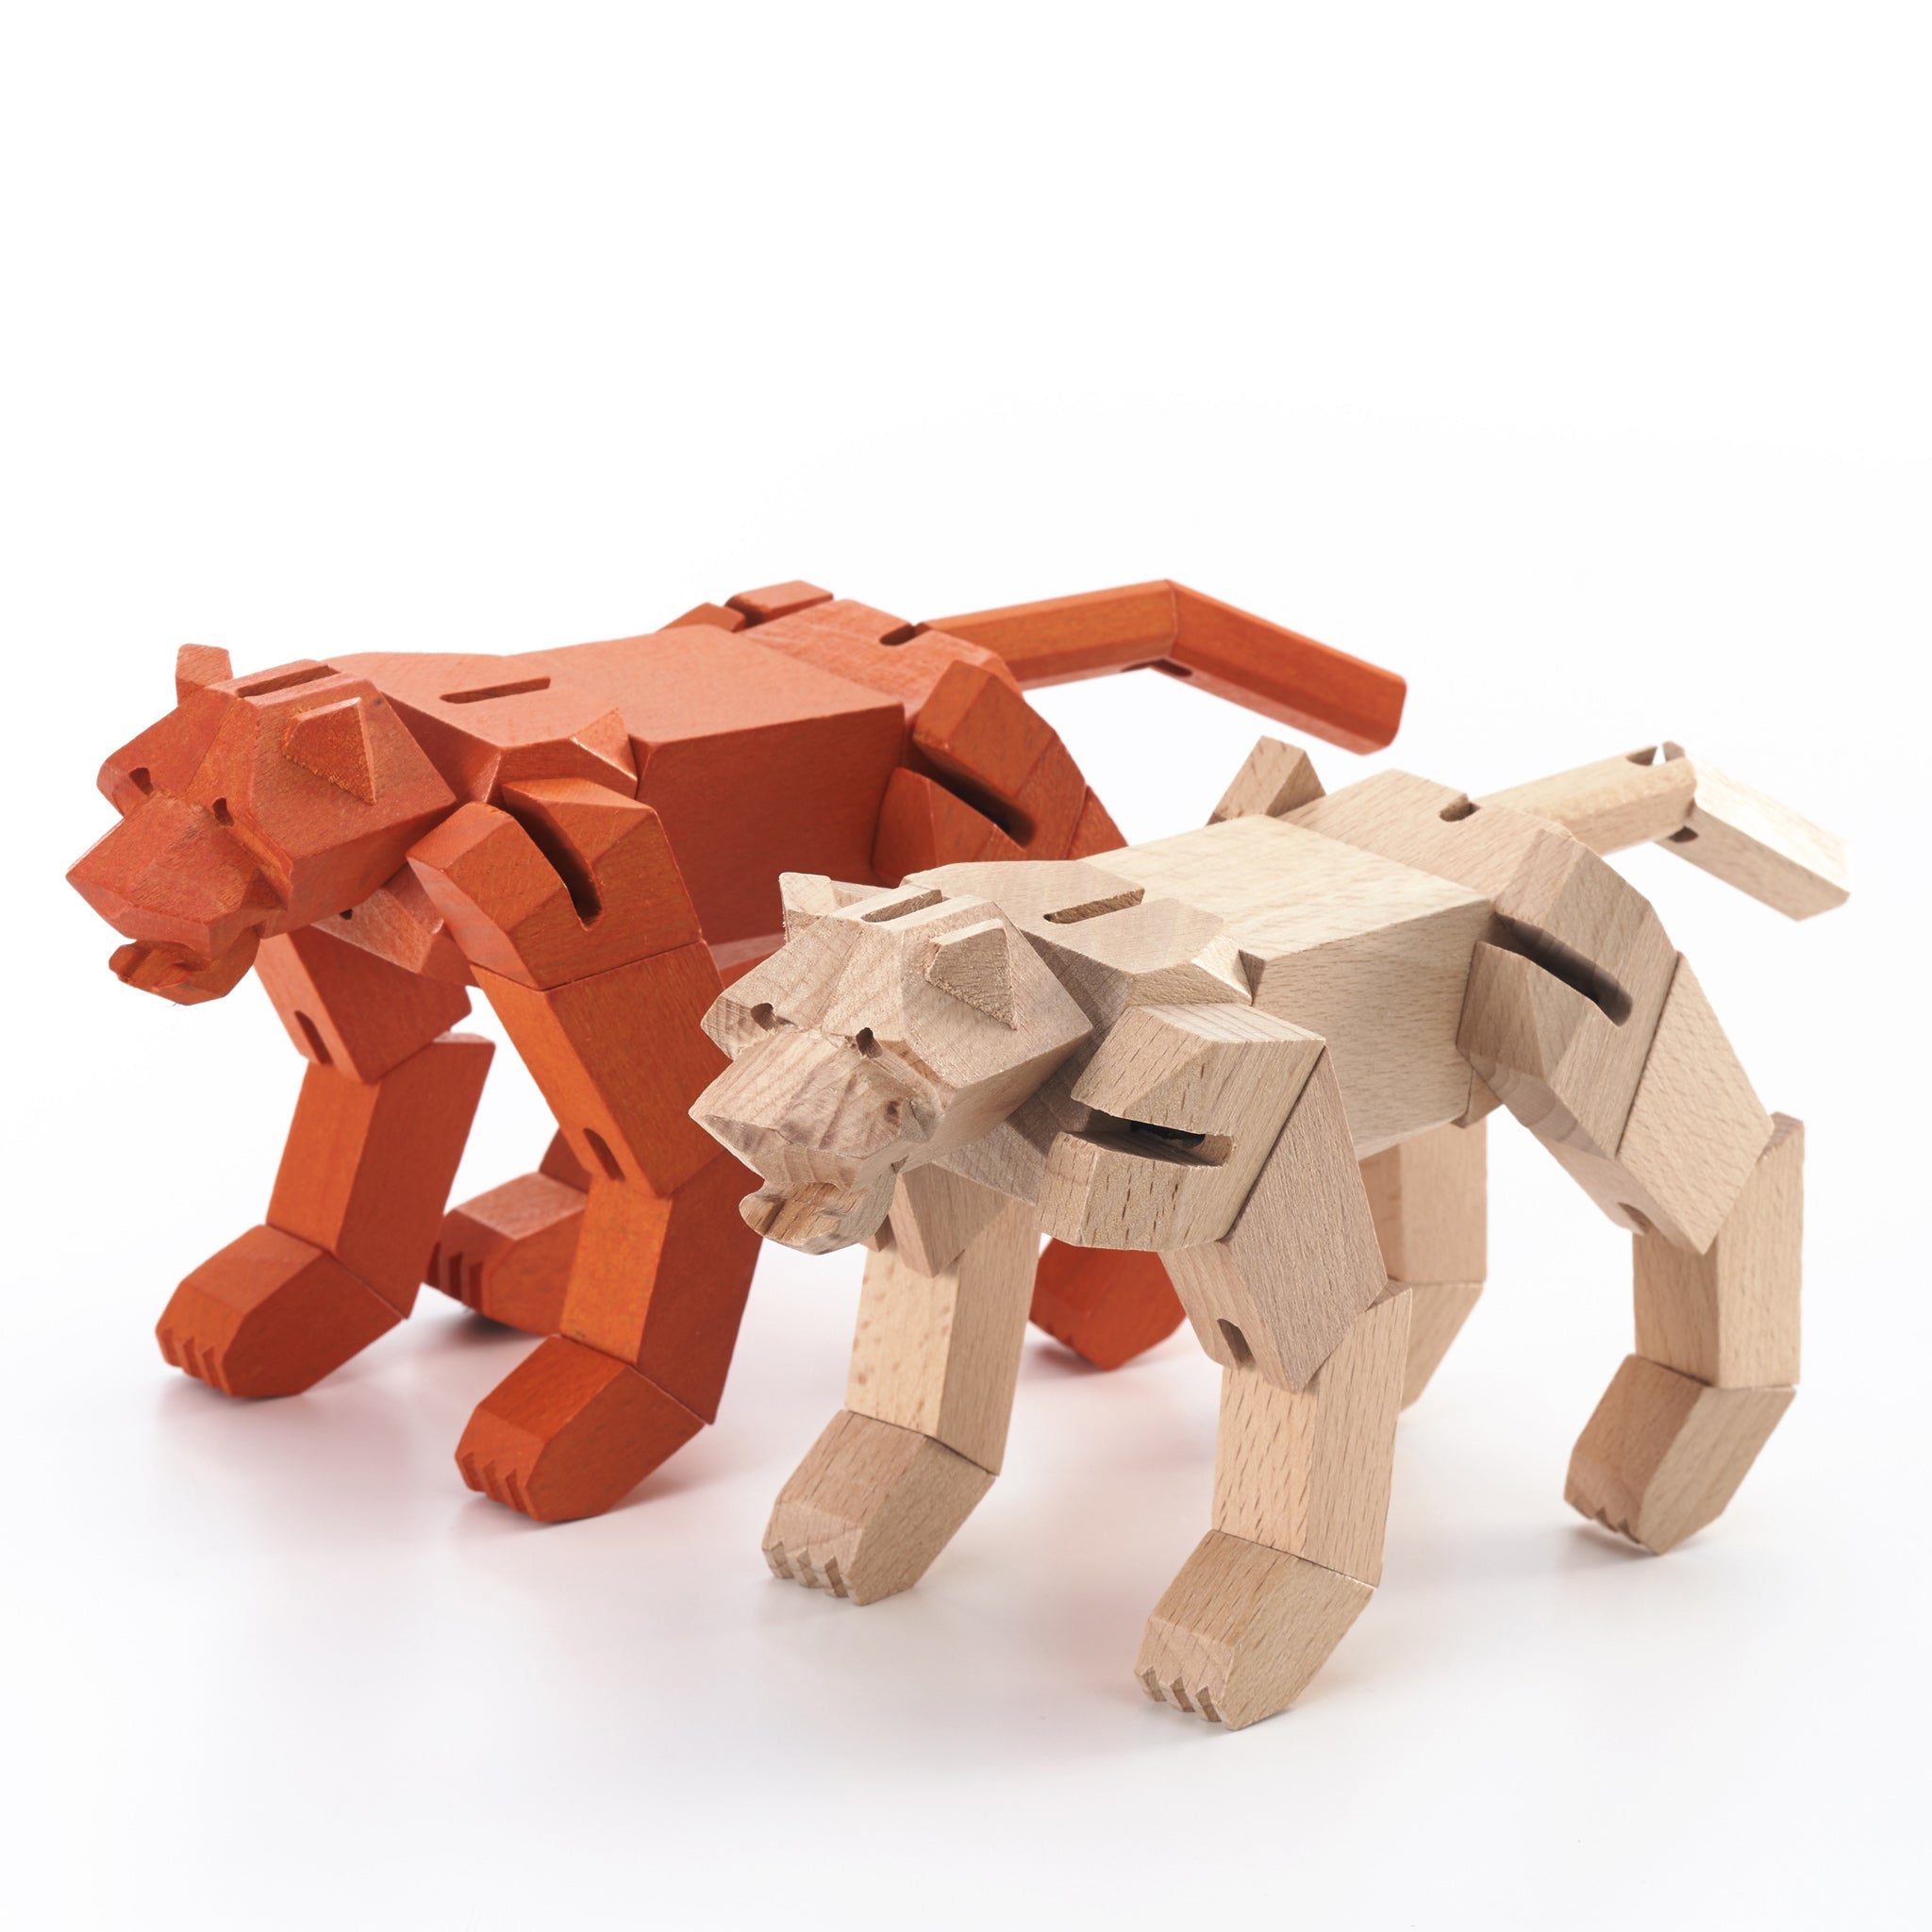 Morphits ® Tiger Wooden Toy Playset Puzzle Natural and Orange